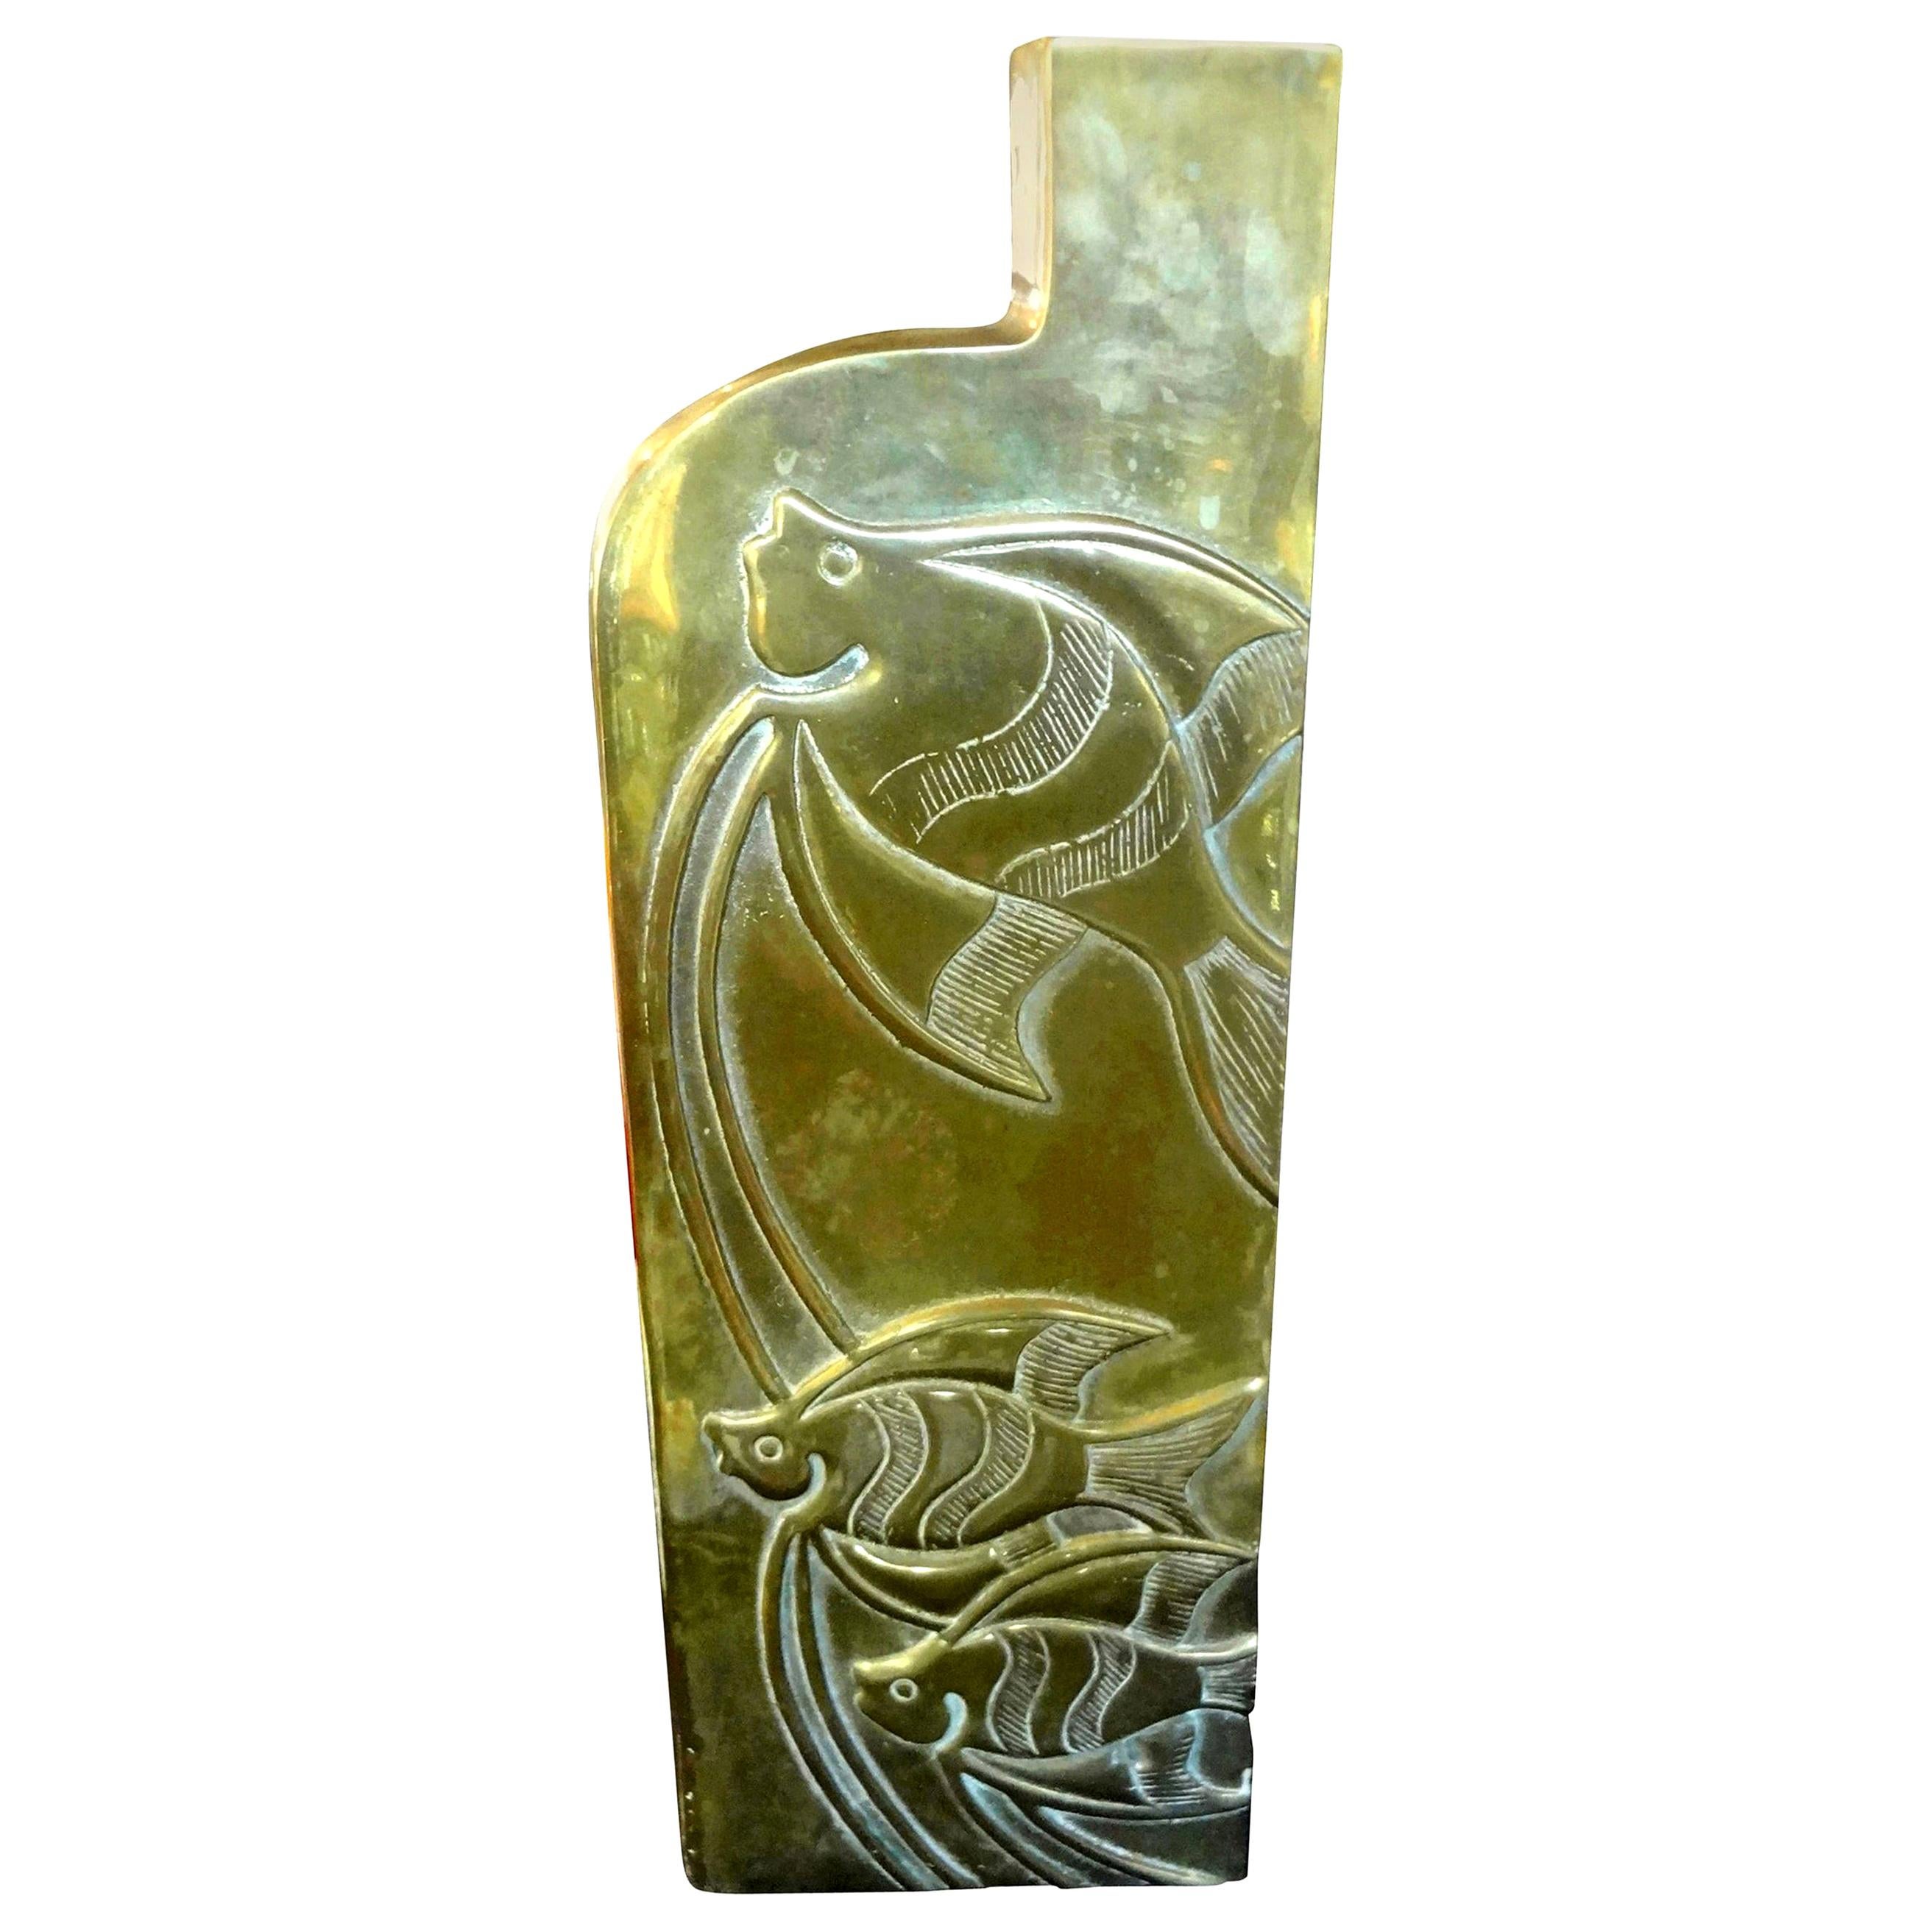 Modernist Brass Vase with Etched Fish